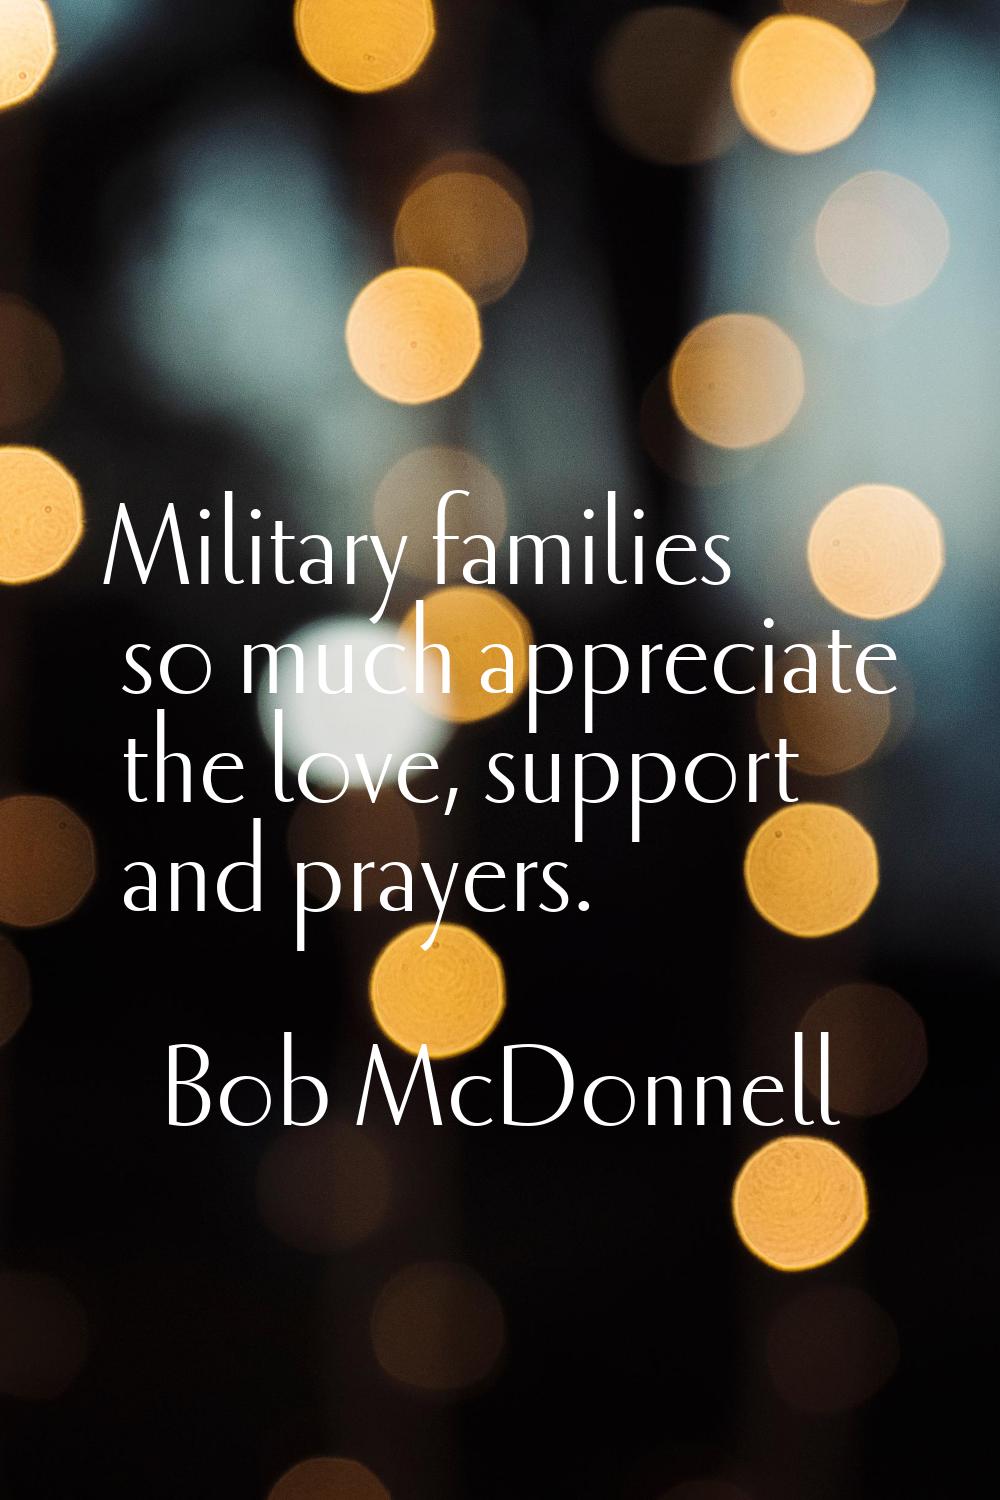 Military families so much appreciate the love, support and prayers.